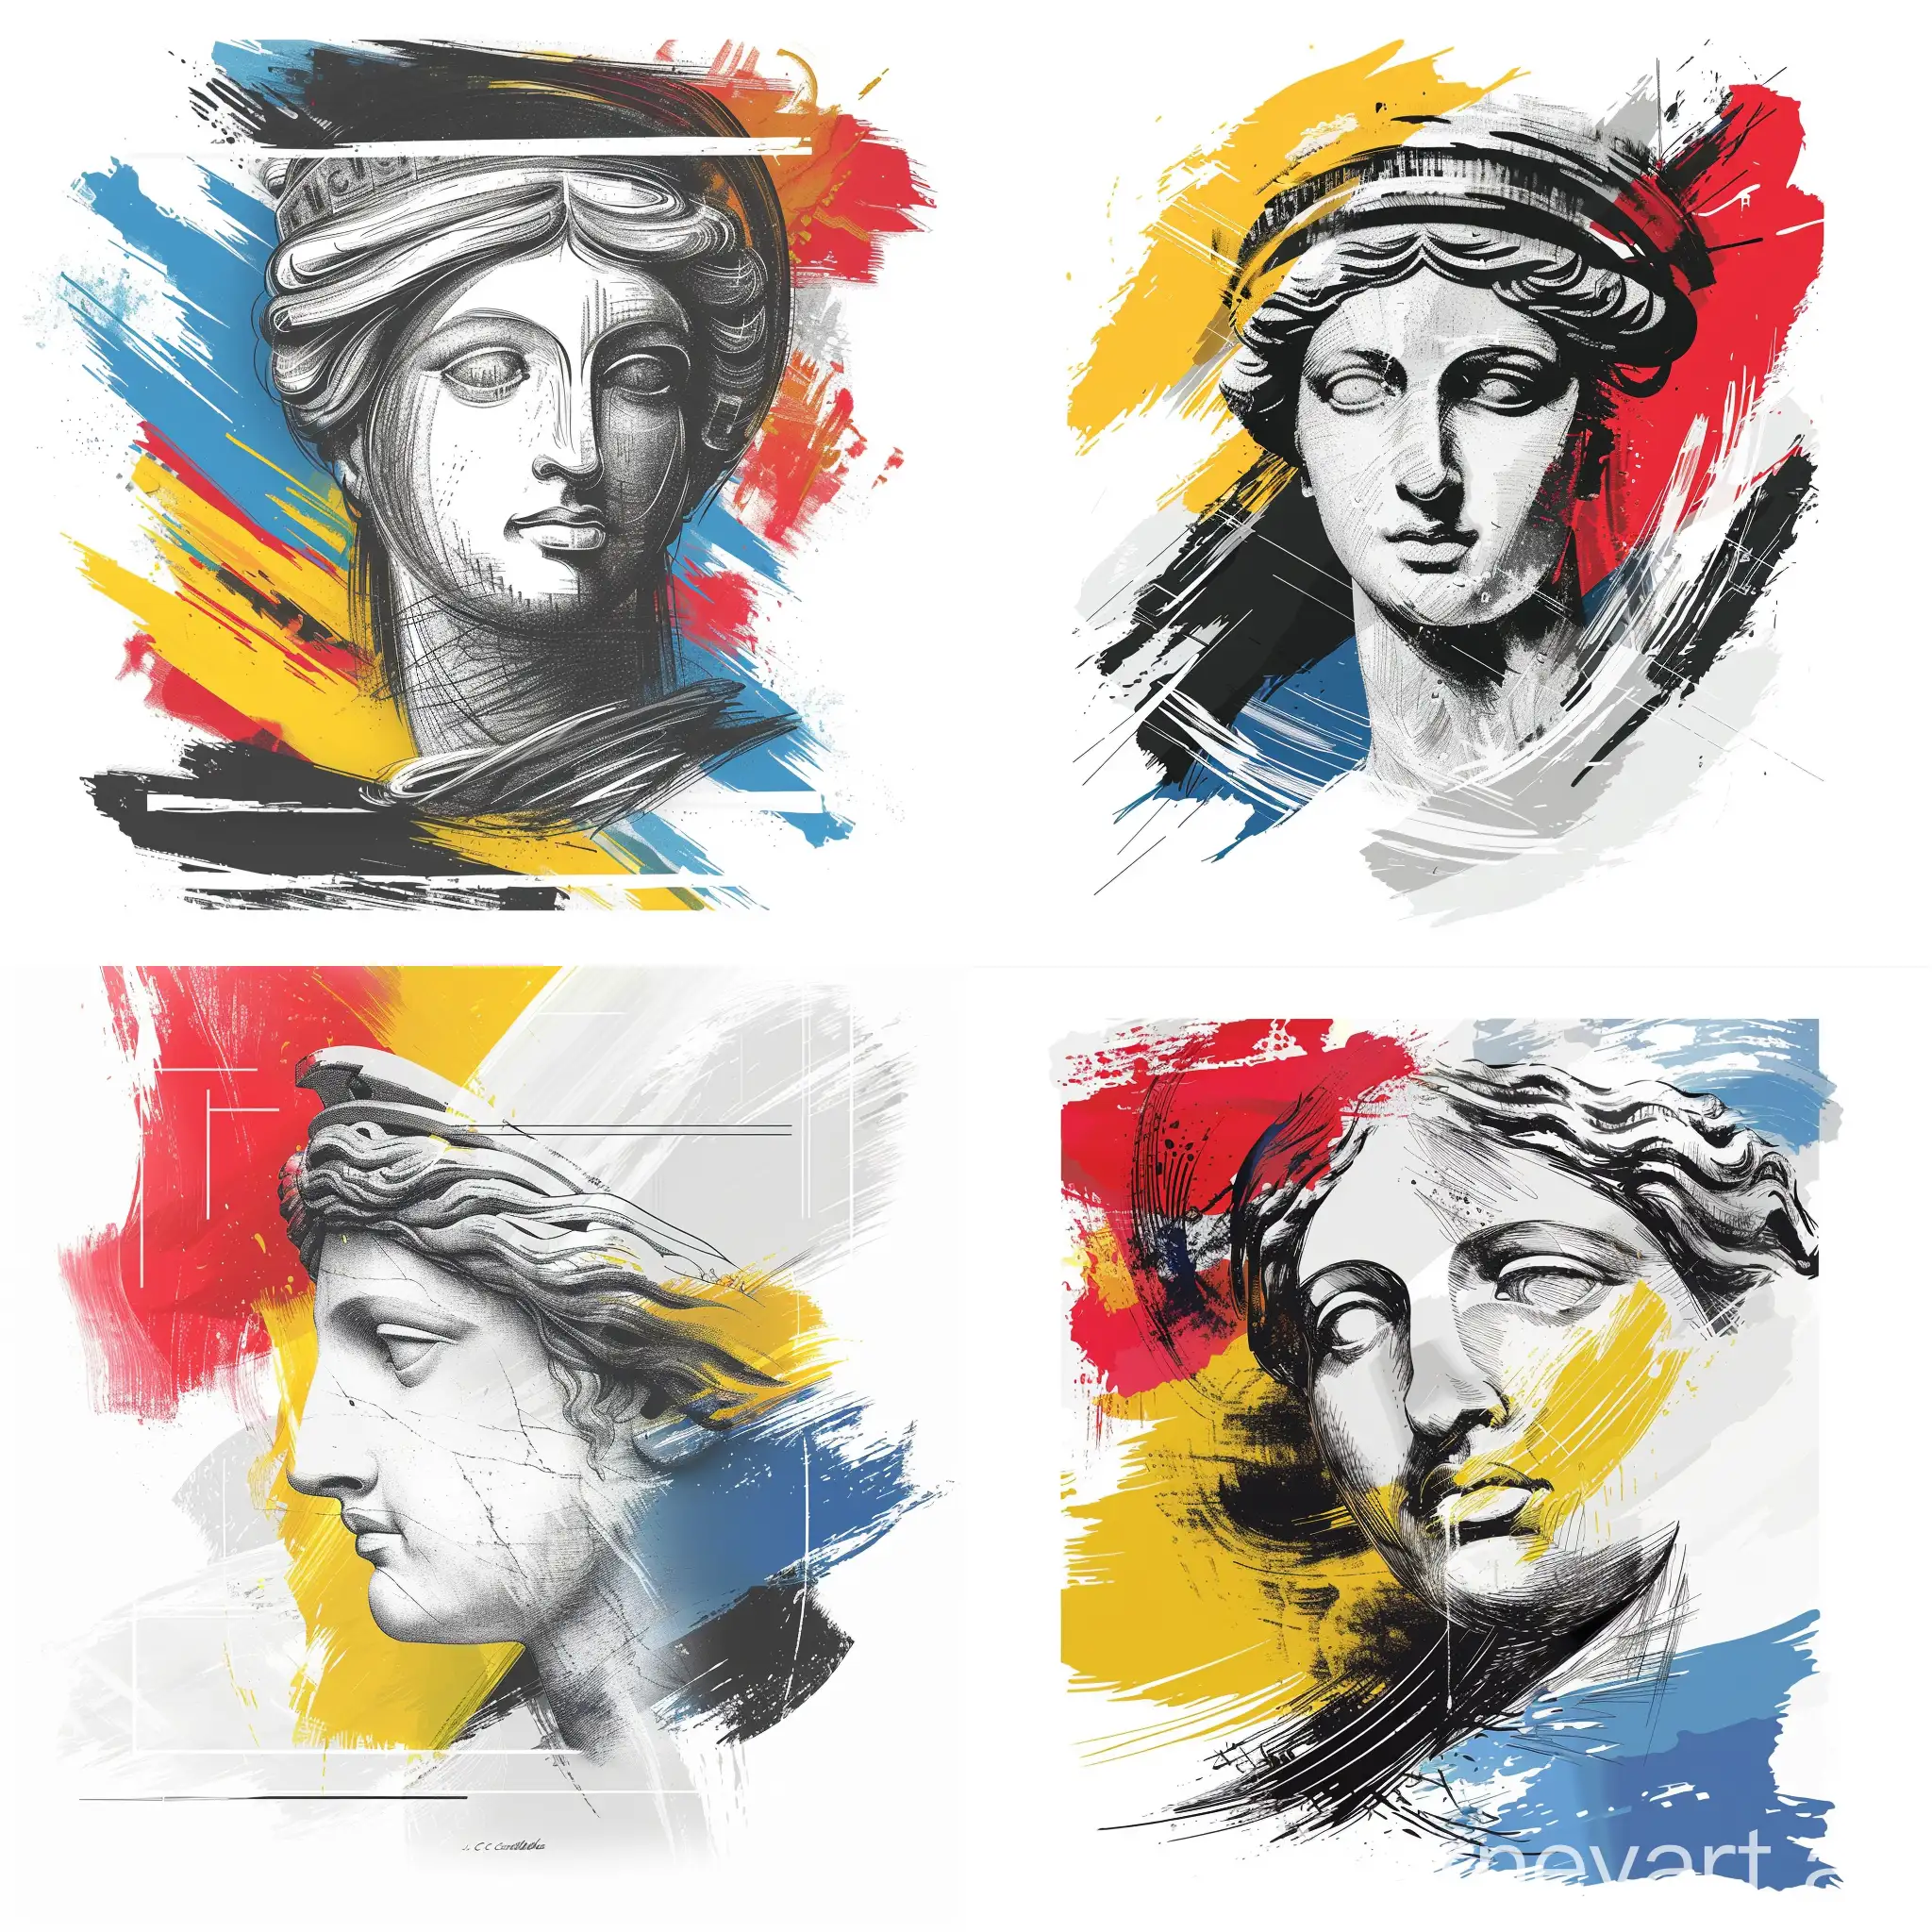 a minimalist vector poster, sketching style, grec statue woman face in fine black line, in back ground touches of red, yellow and blue colors on a white background with the jc de castelbajac style, big white brush strokes all around the poster, high definition, white around the cover